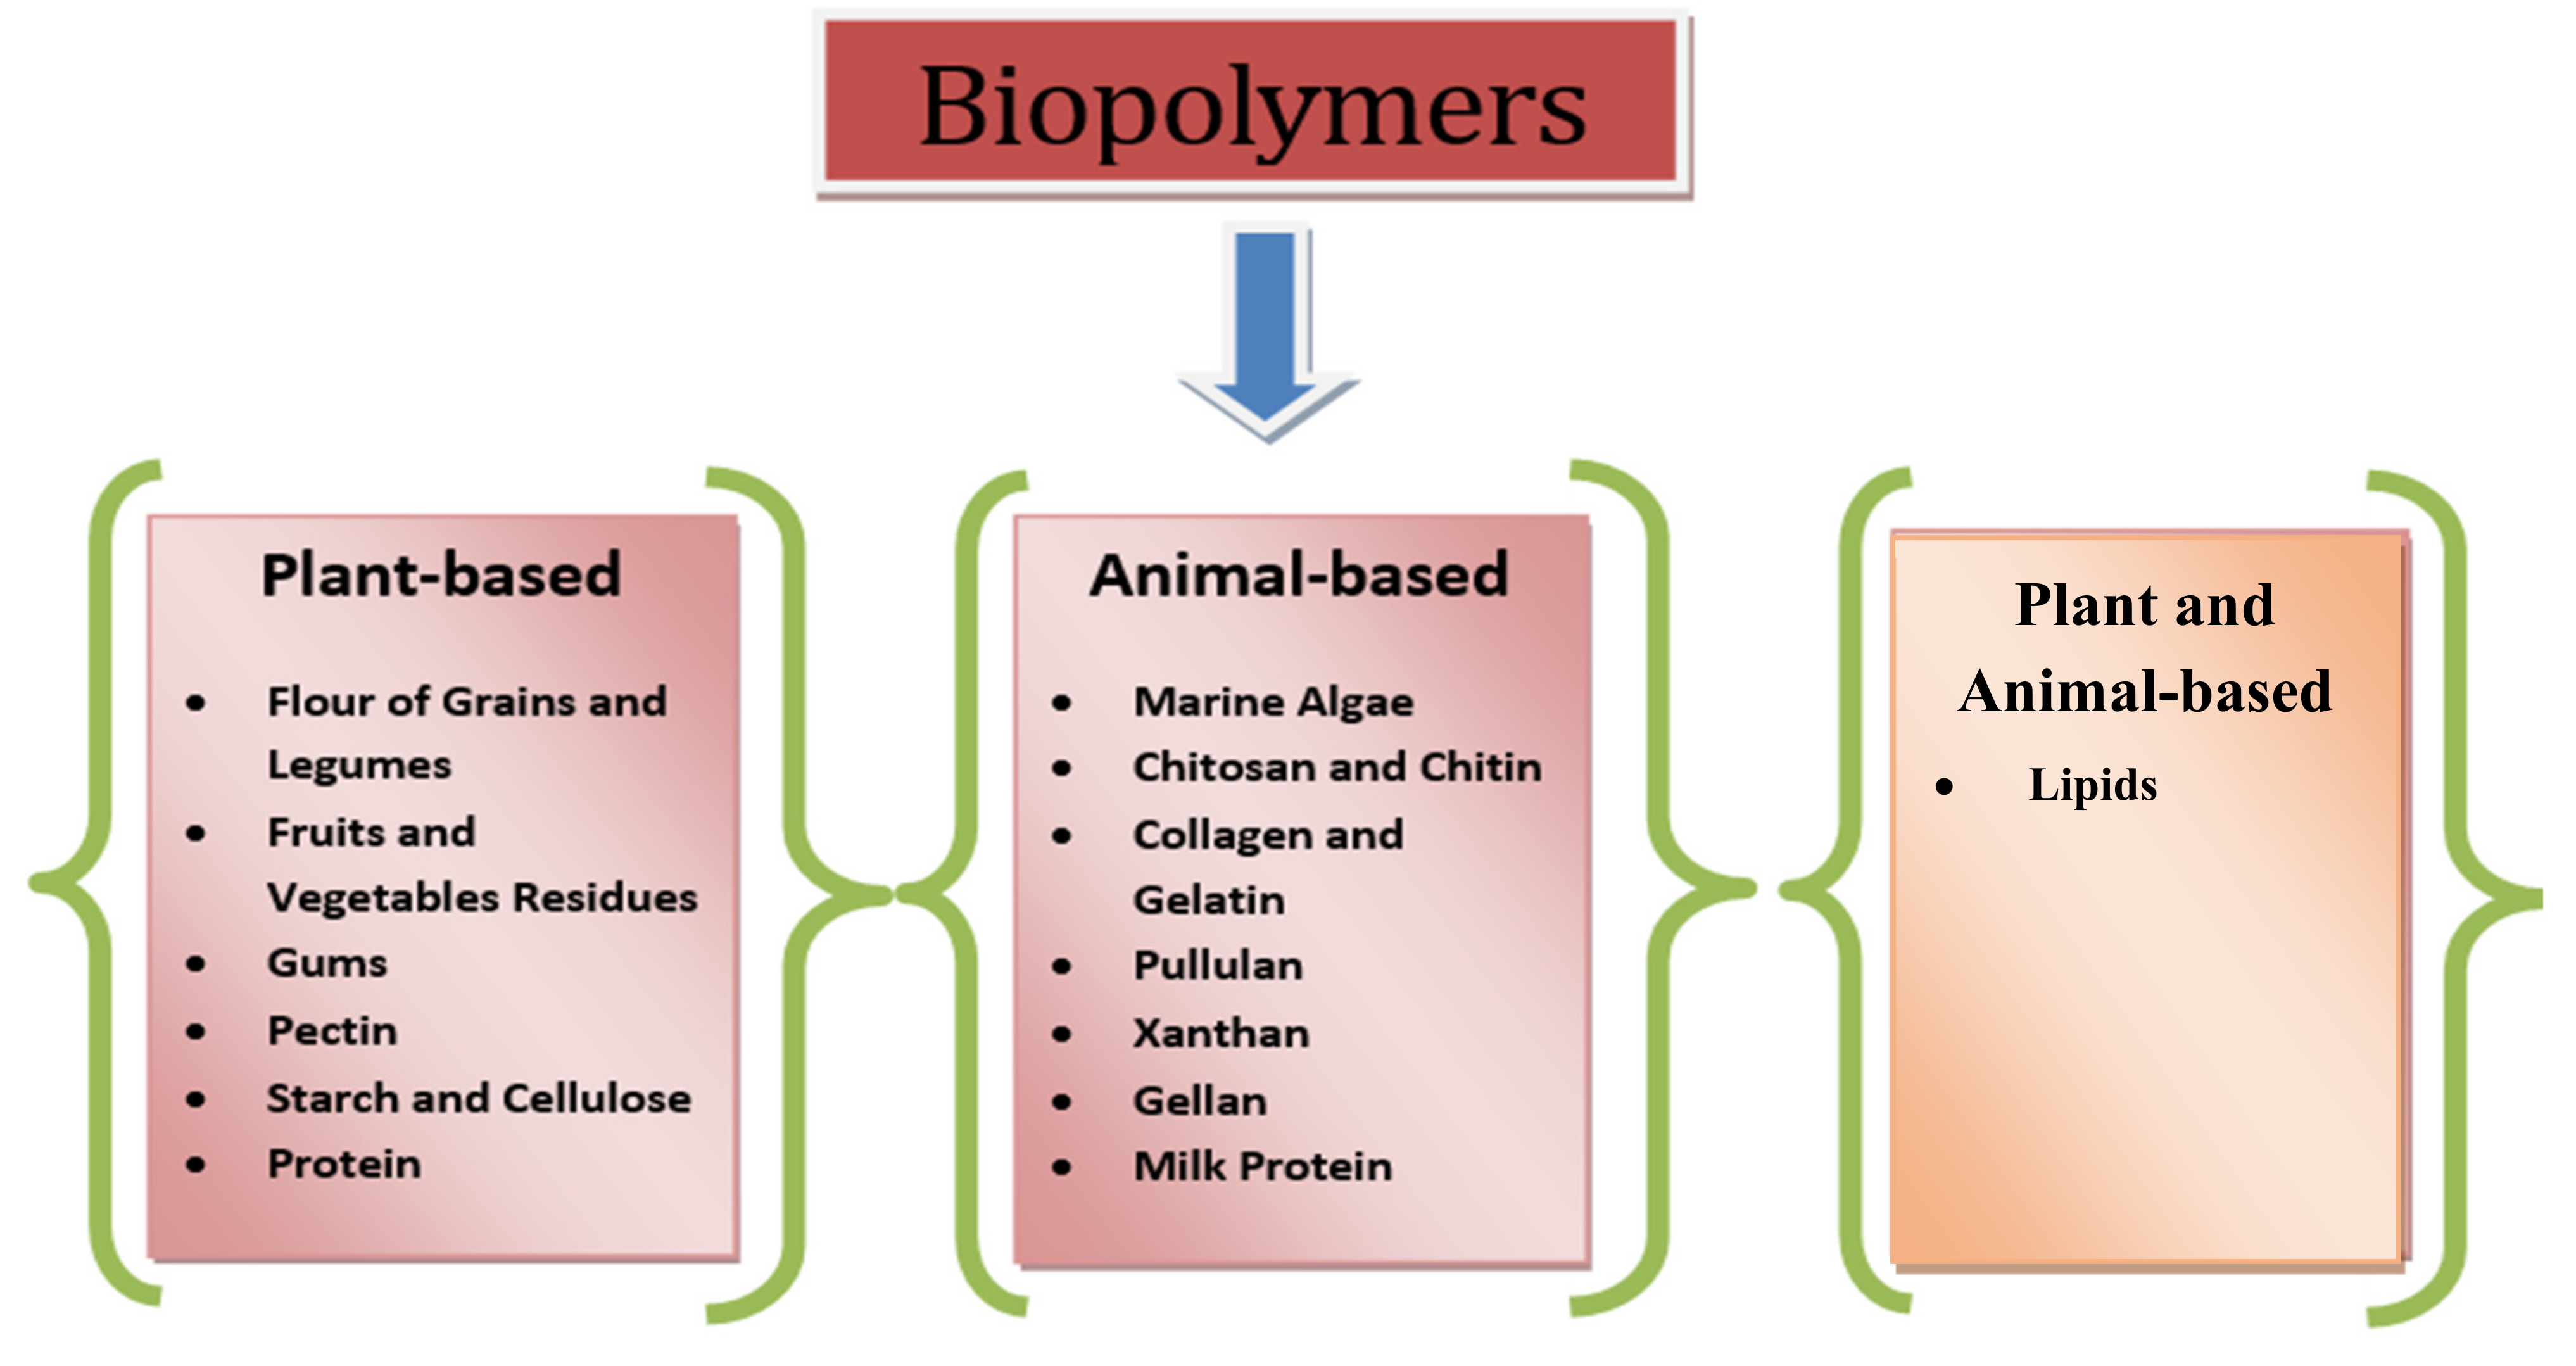 biodegradable polymers examples